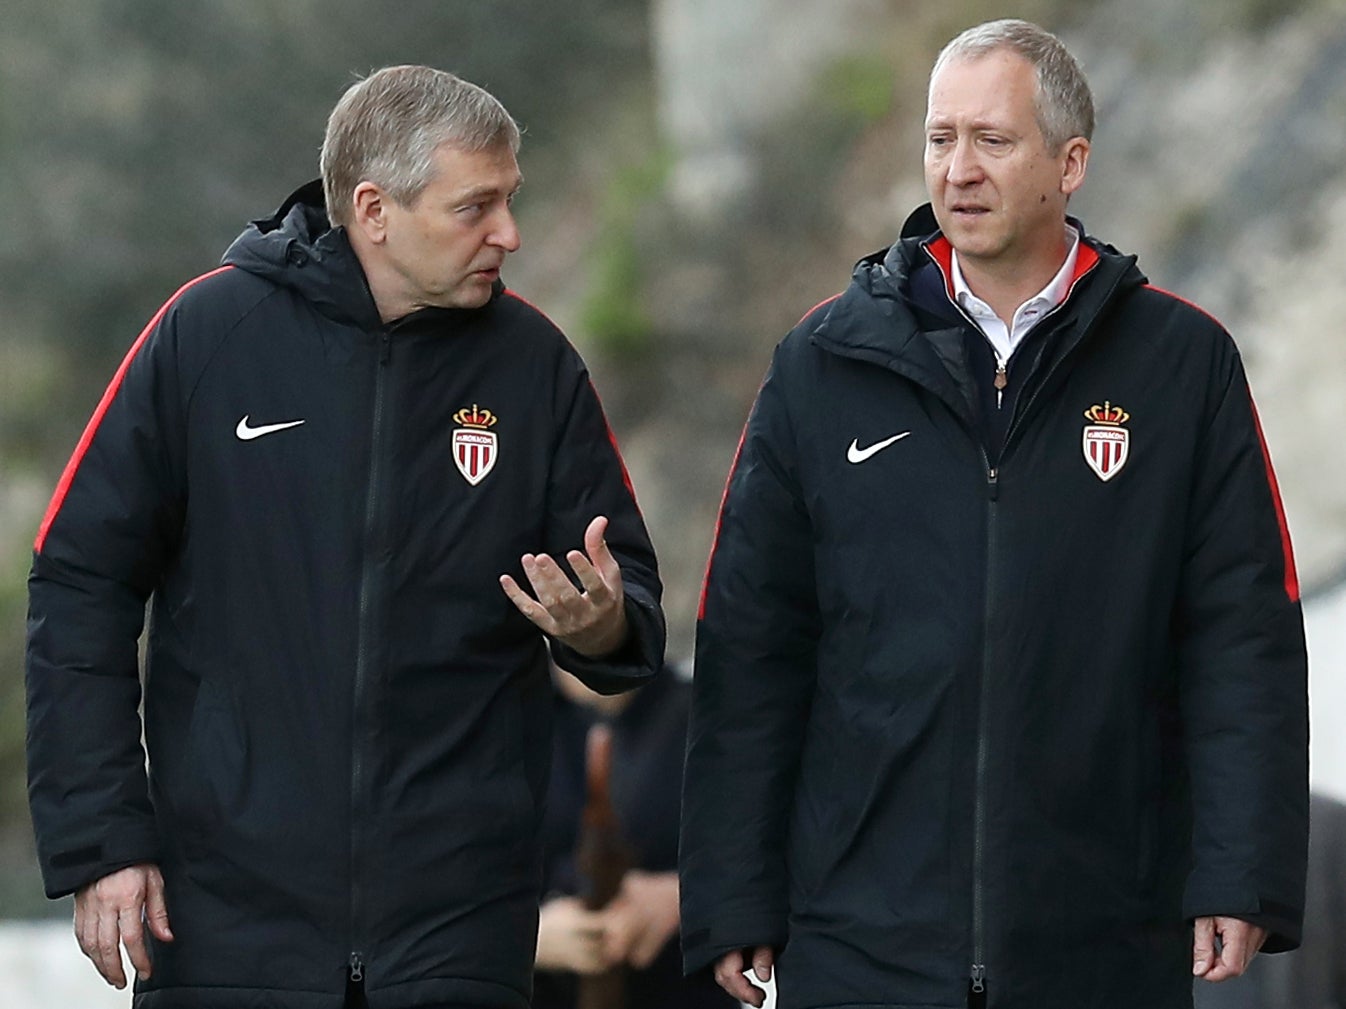 Rybolovlev (left) has transformed Monaco's fortunes since taking over in 2011